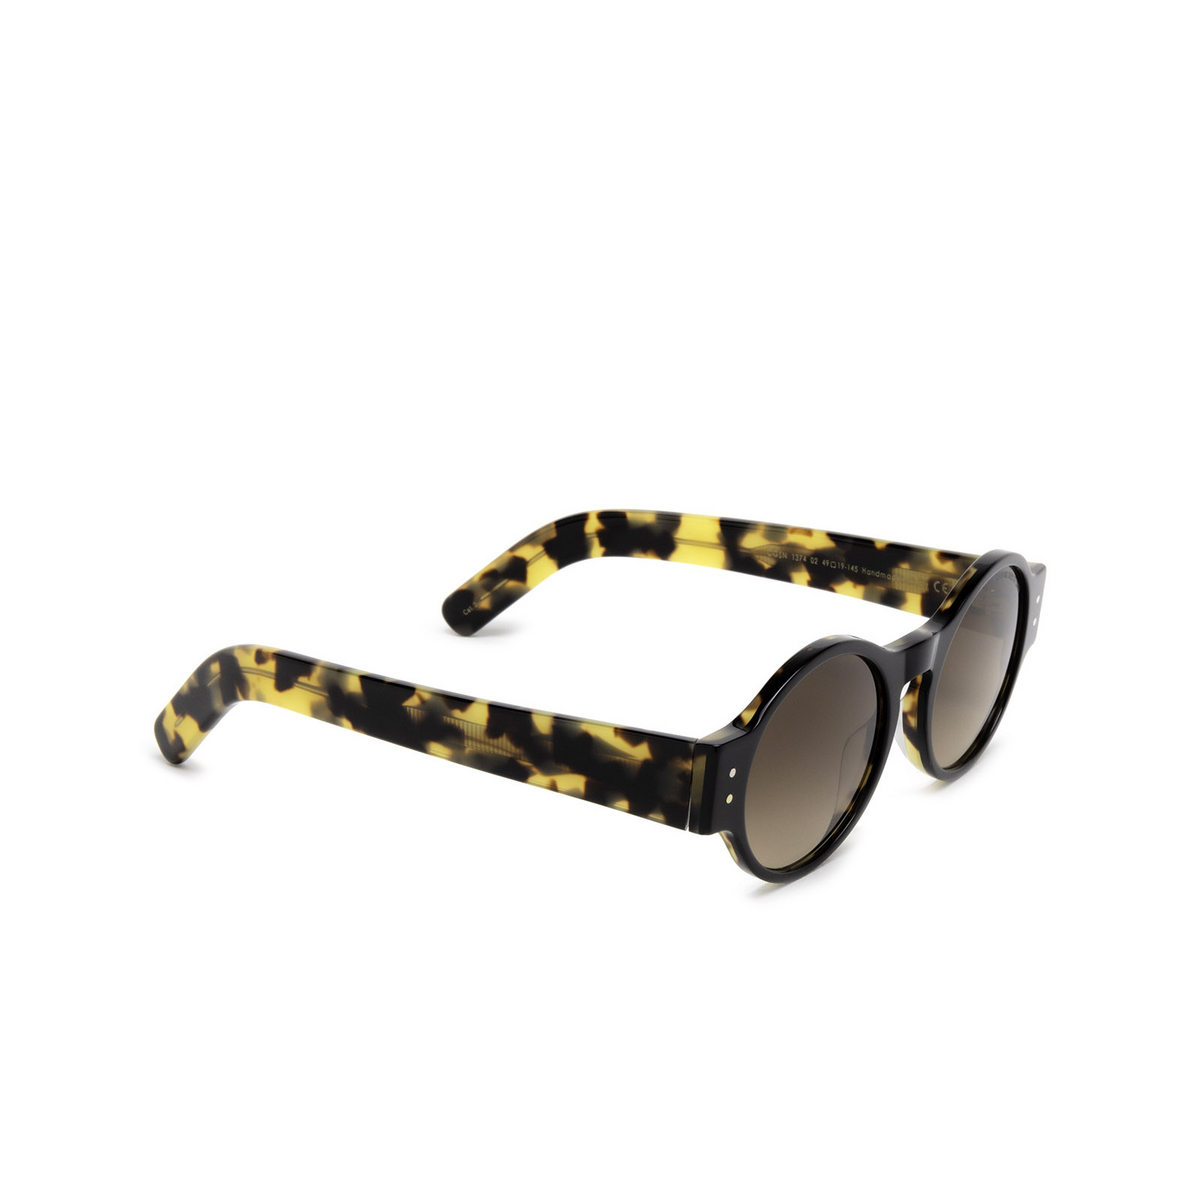 Cutler and Gross® Round Sunglasses: 1374 SUN color Black On Camo 02 - three-quarters view.